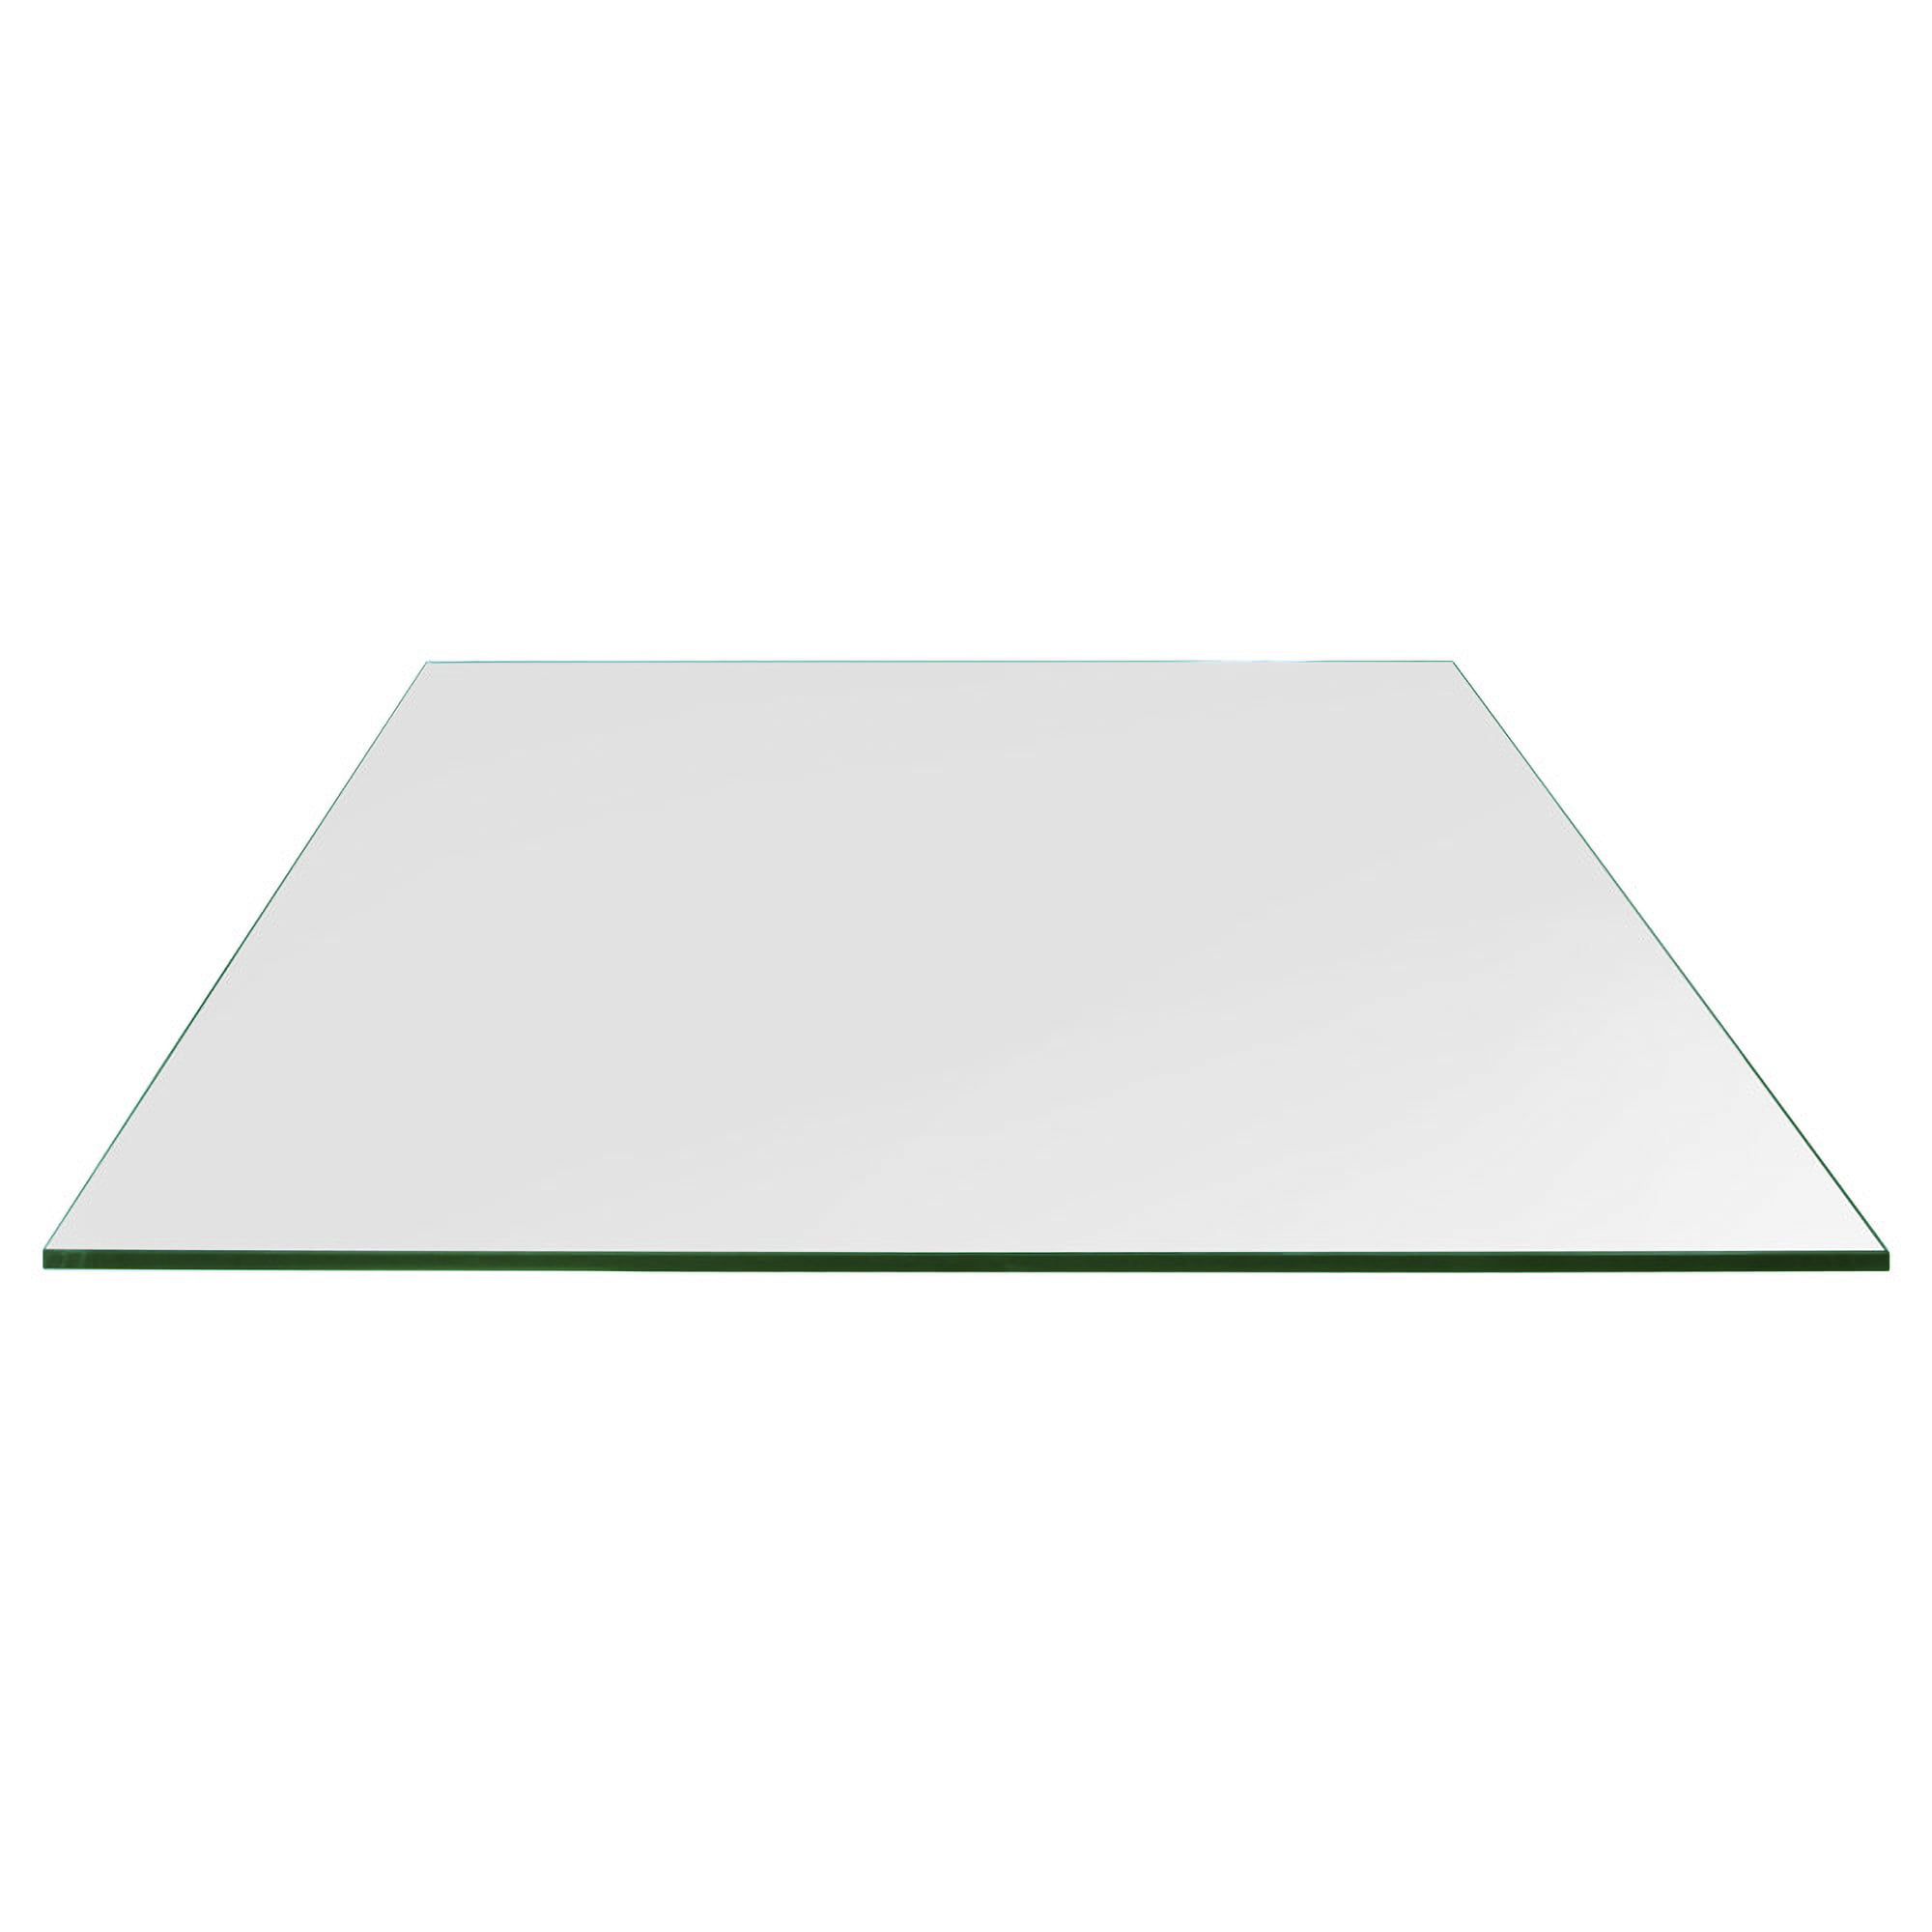 30" x 50" Inch Rectangle Clear Tempered Glass Table Top 1/2" thick Flat edge 